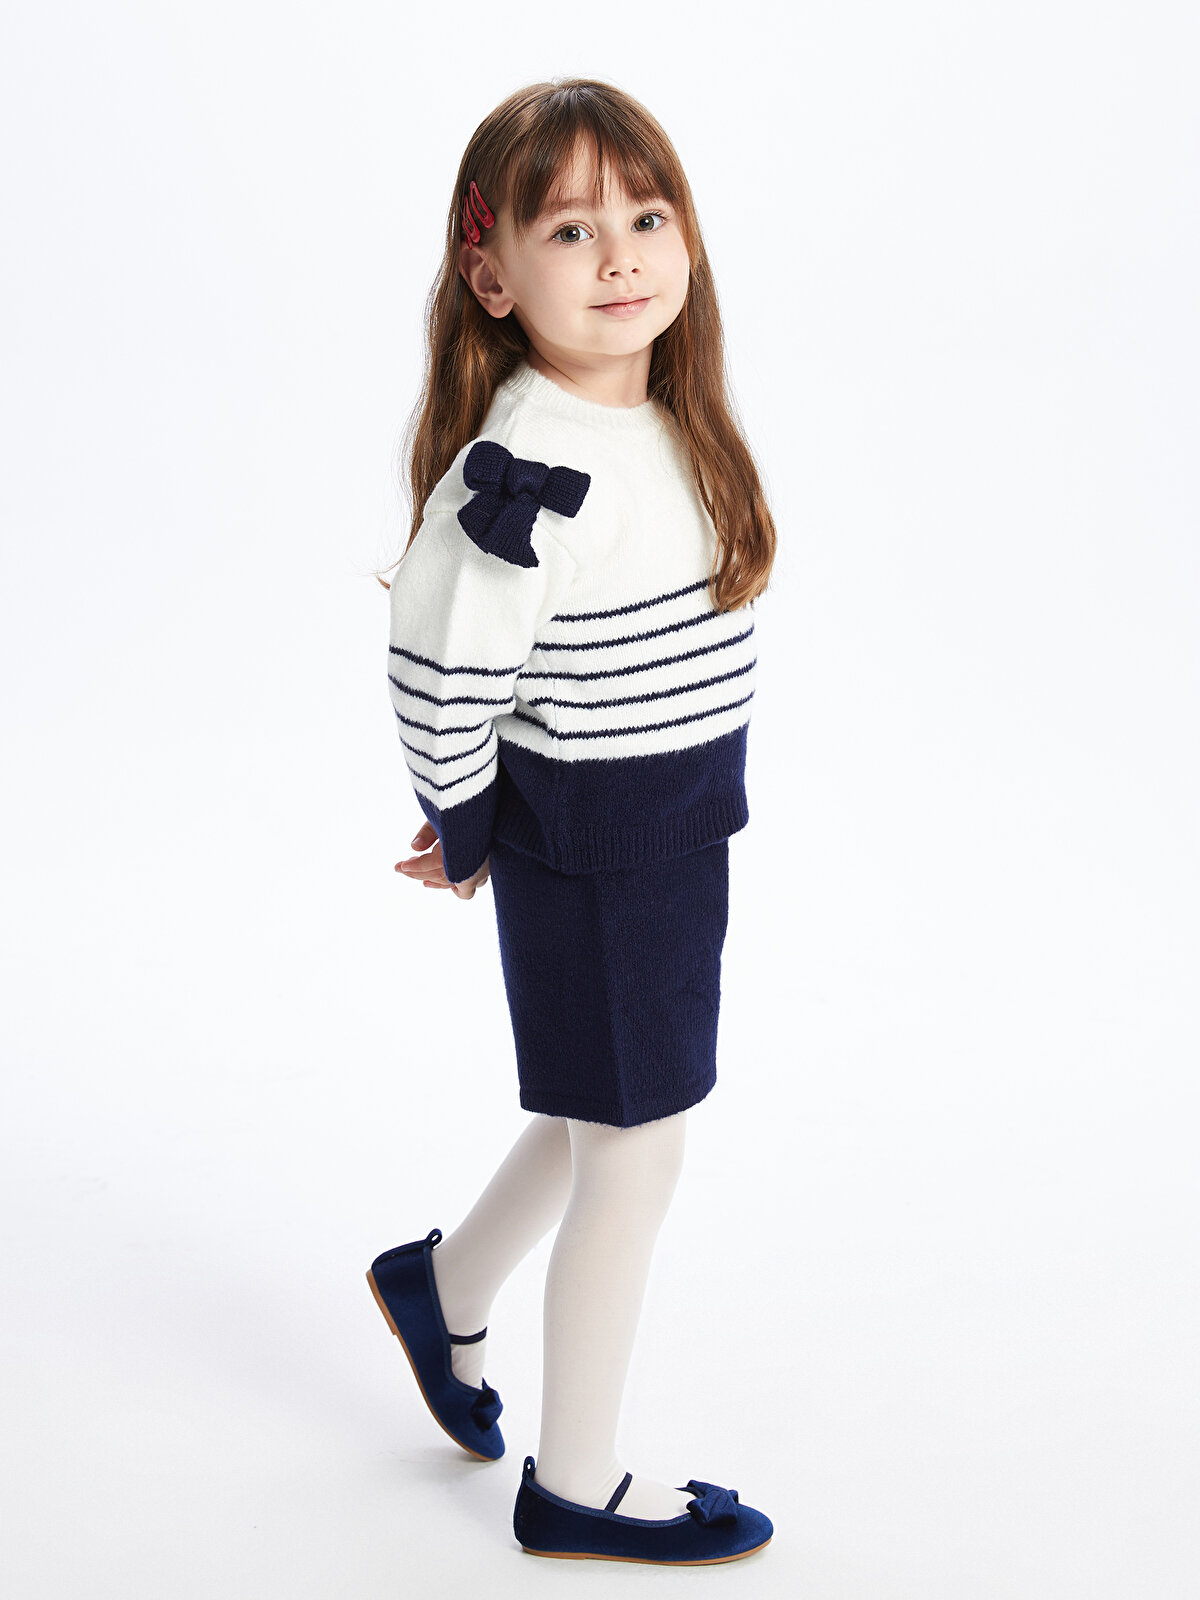 Crew Neck Striped Baby Girl Knitwear Sweater, Shorts and 